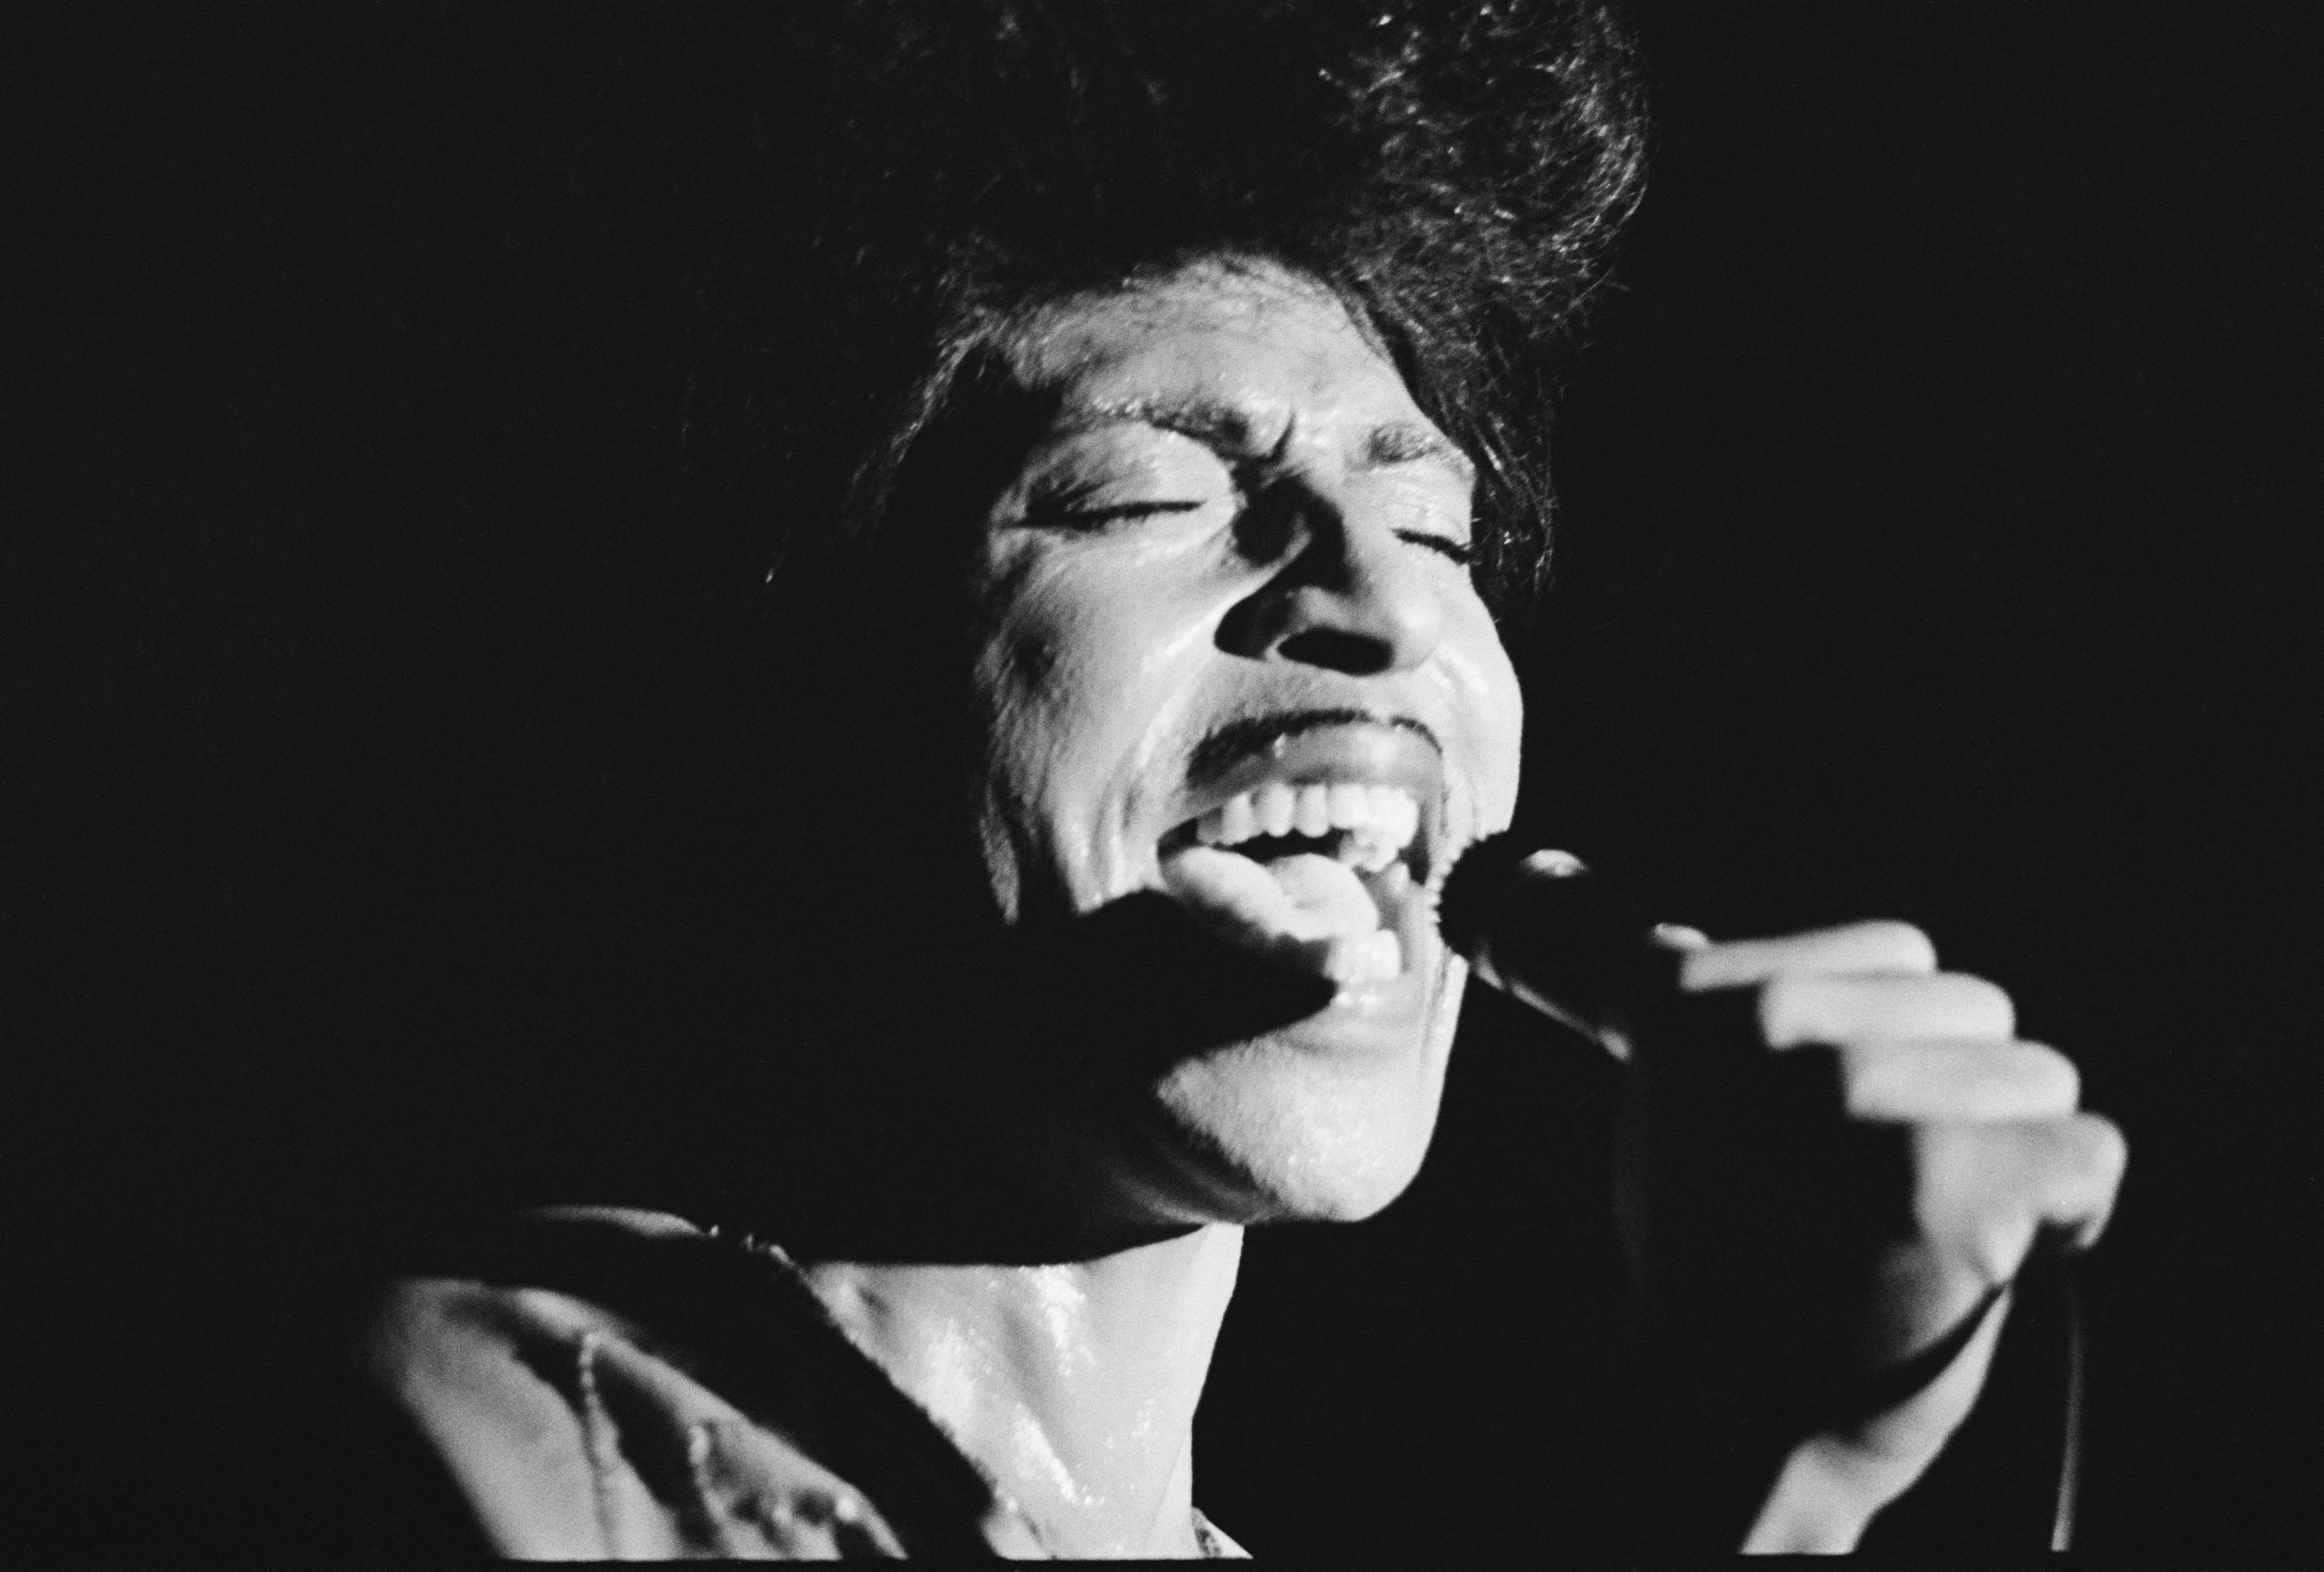 Little Richard Put Wild Sex Into the Top 40 for Good